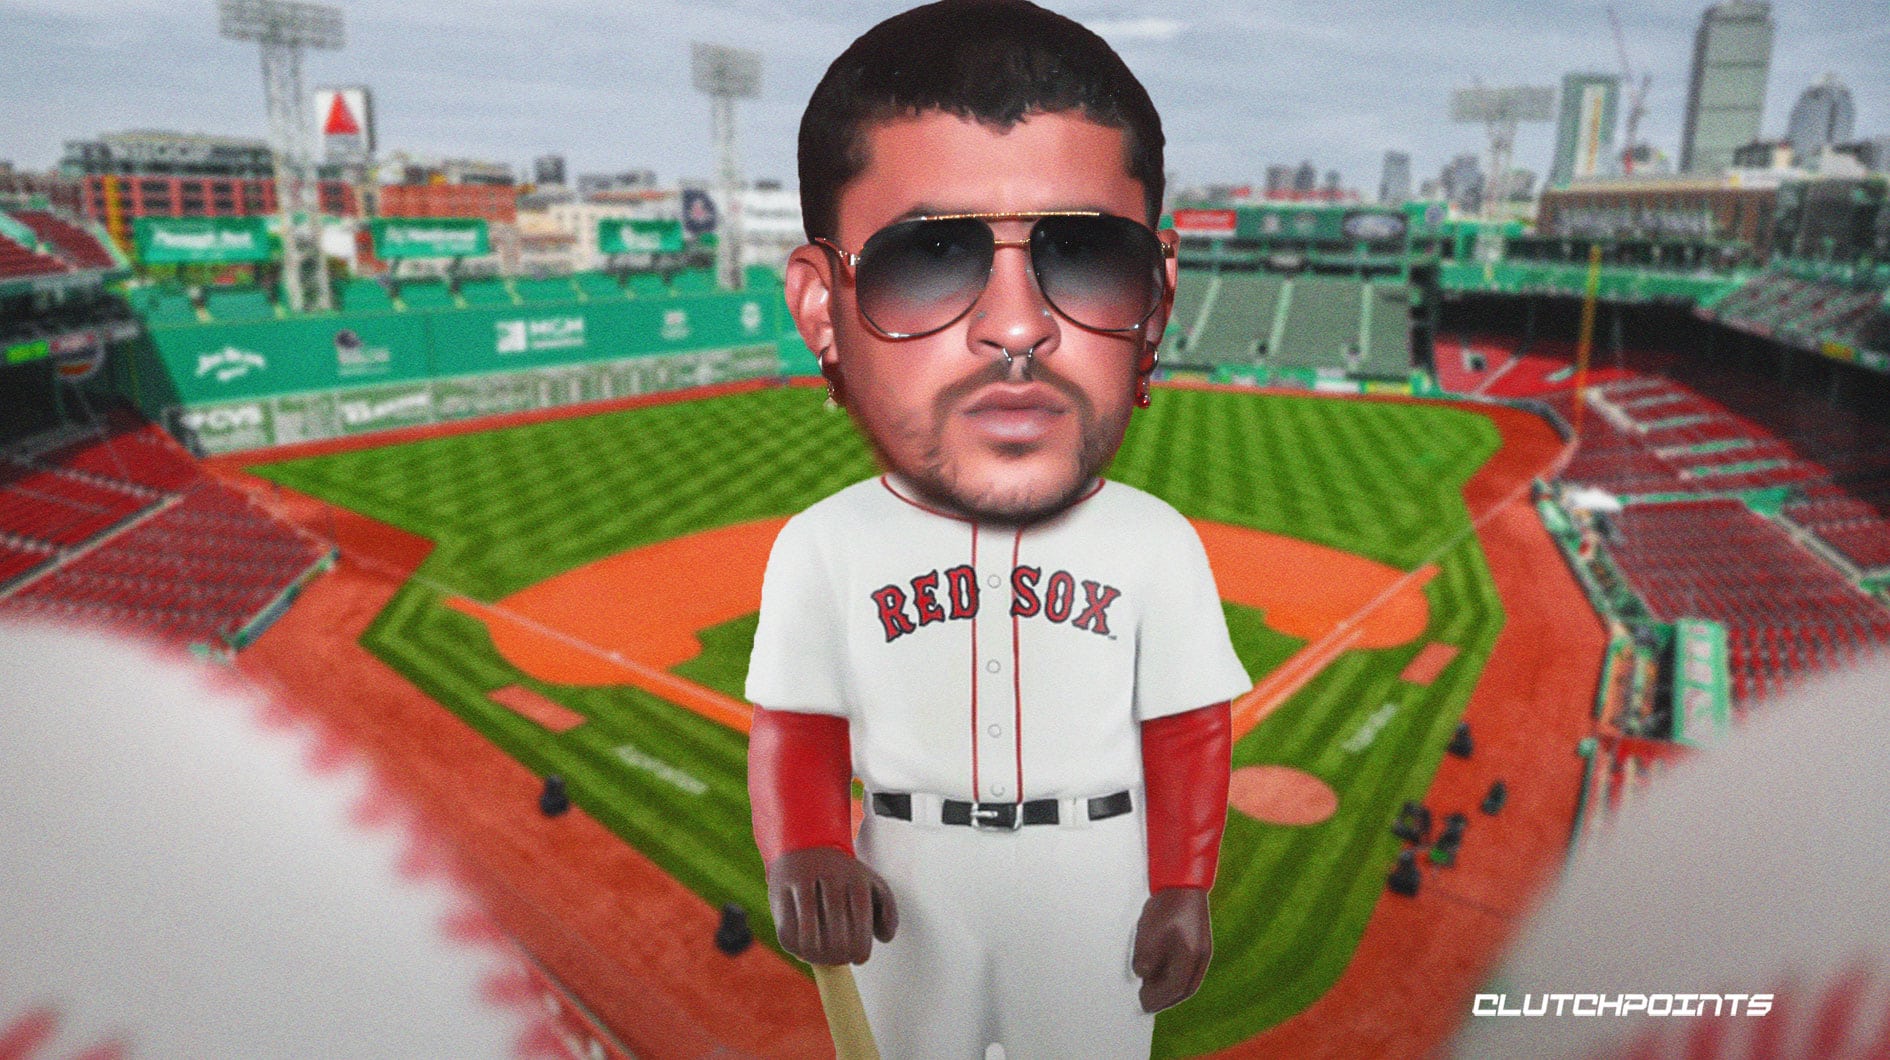 Red Sox hosting Bad Bunny night August 28th, giving away inspired bobblehead